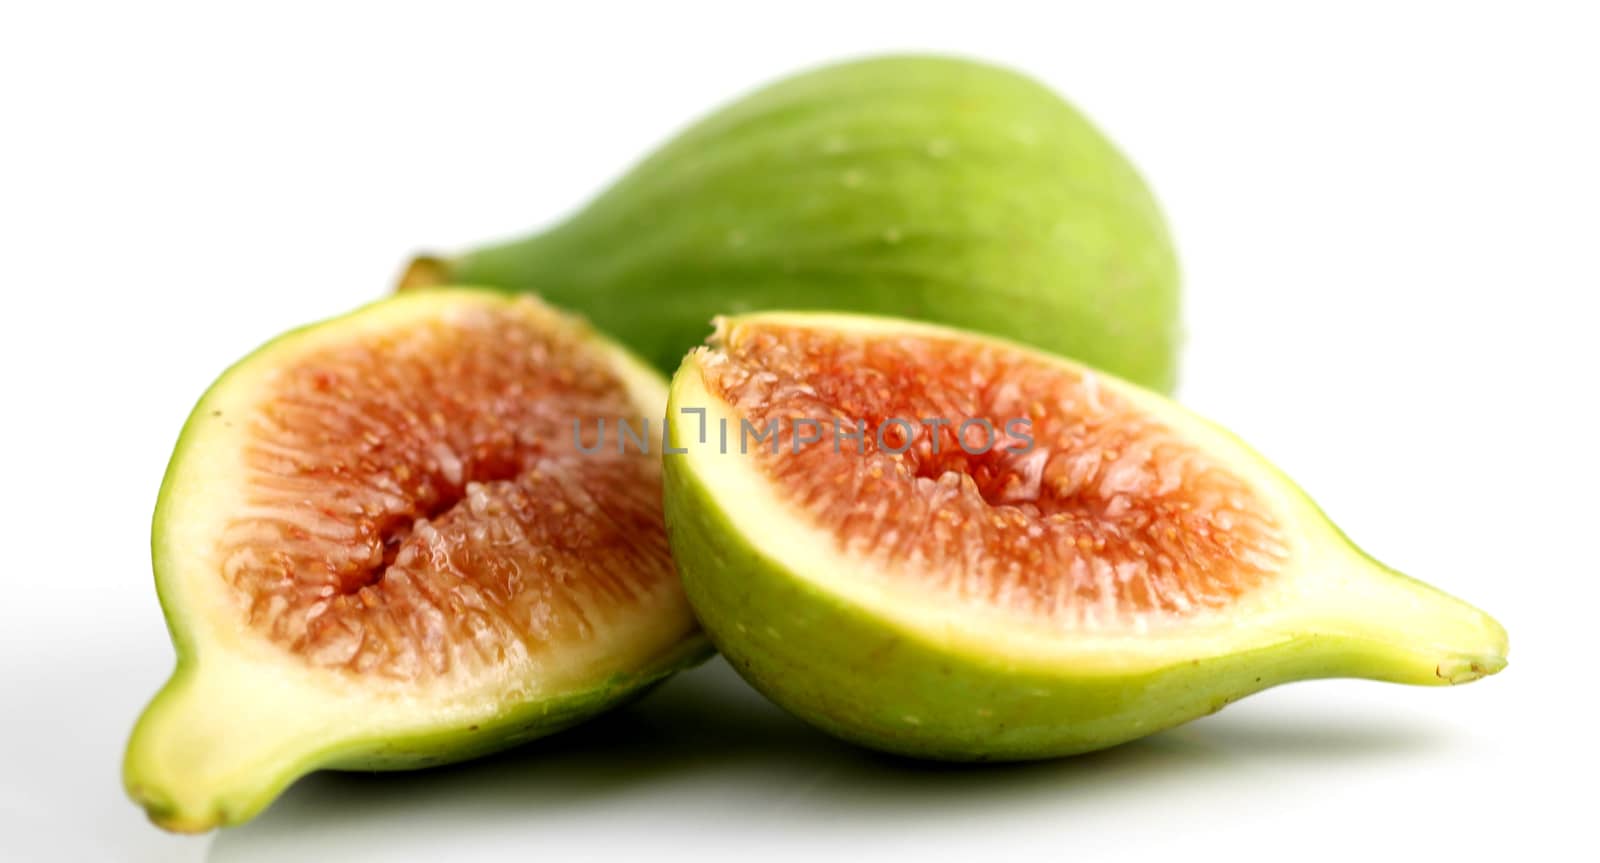 Green fig cut open on white background.